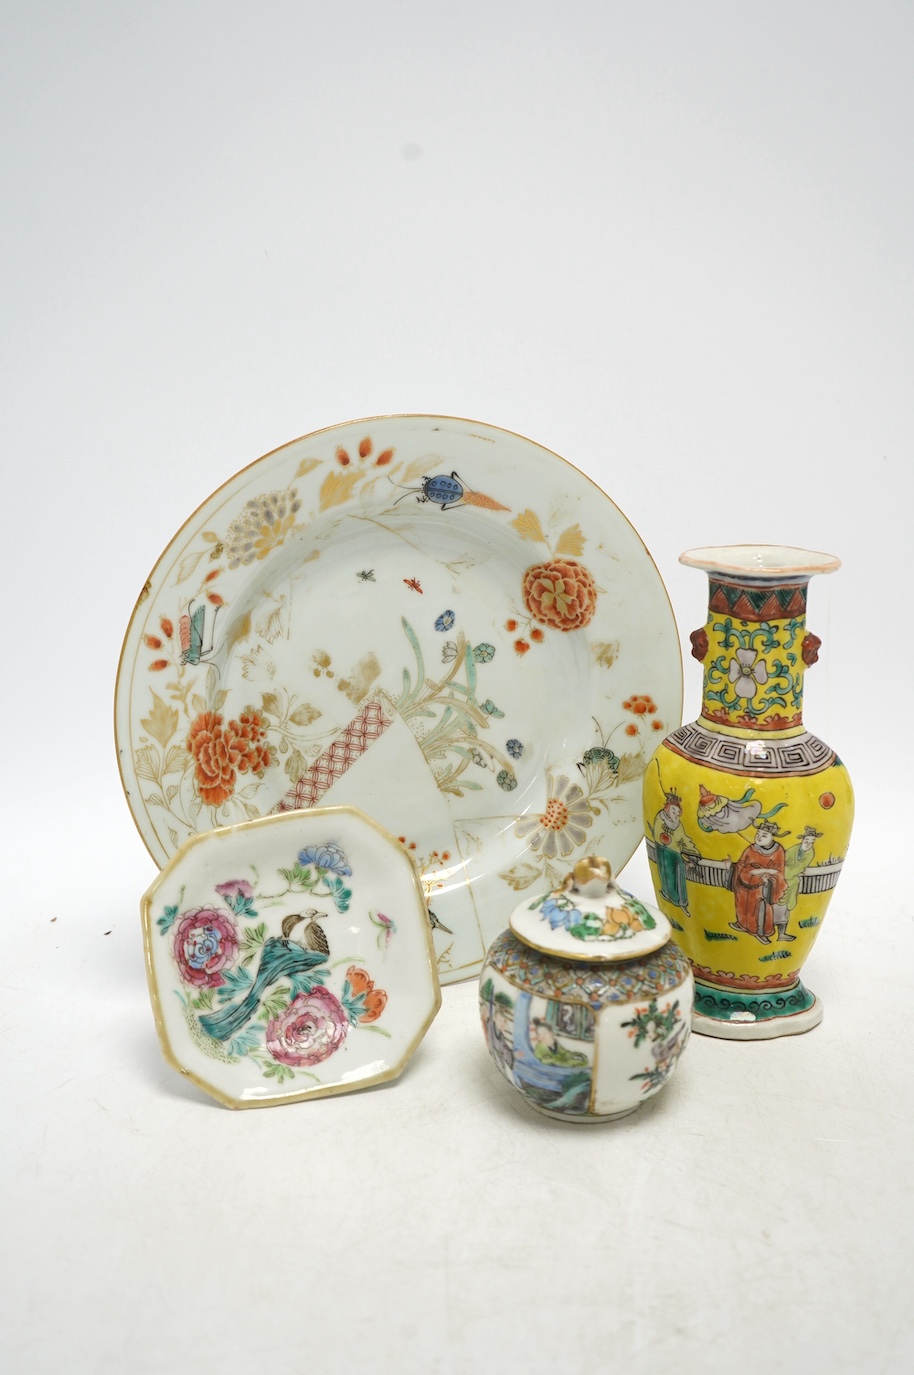 19th century Chinese enamelled porcelain to include a vase, jar & cover, a famille rose dish and a Japanese plate, largest 21.5cm high. Condition - poor to fair